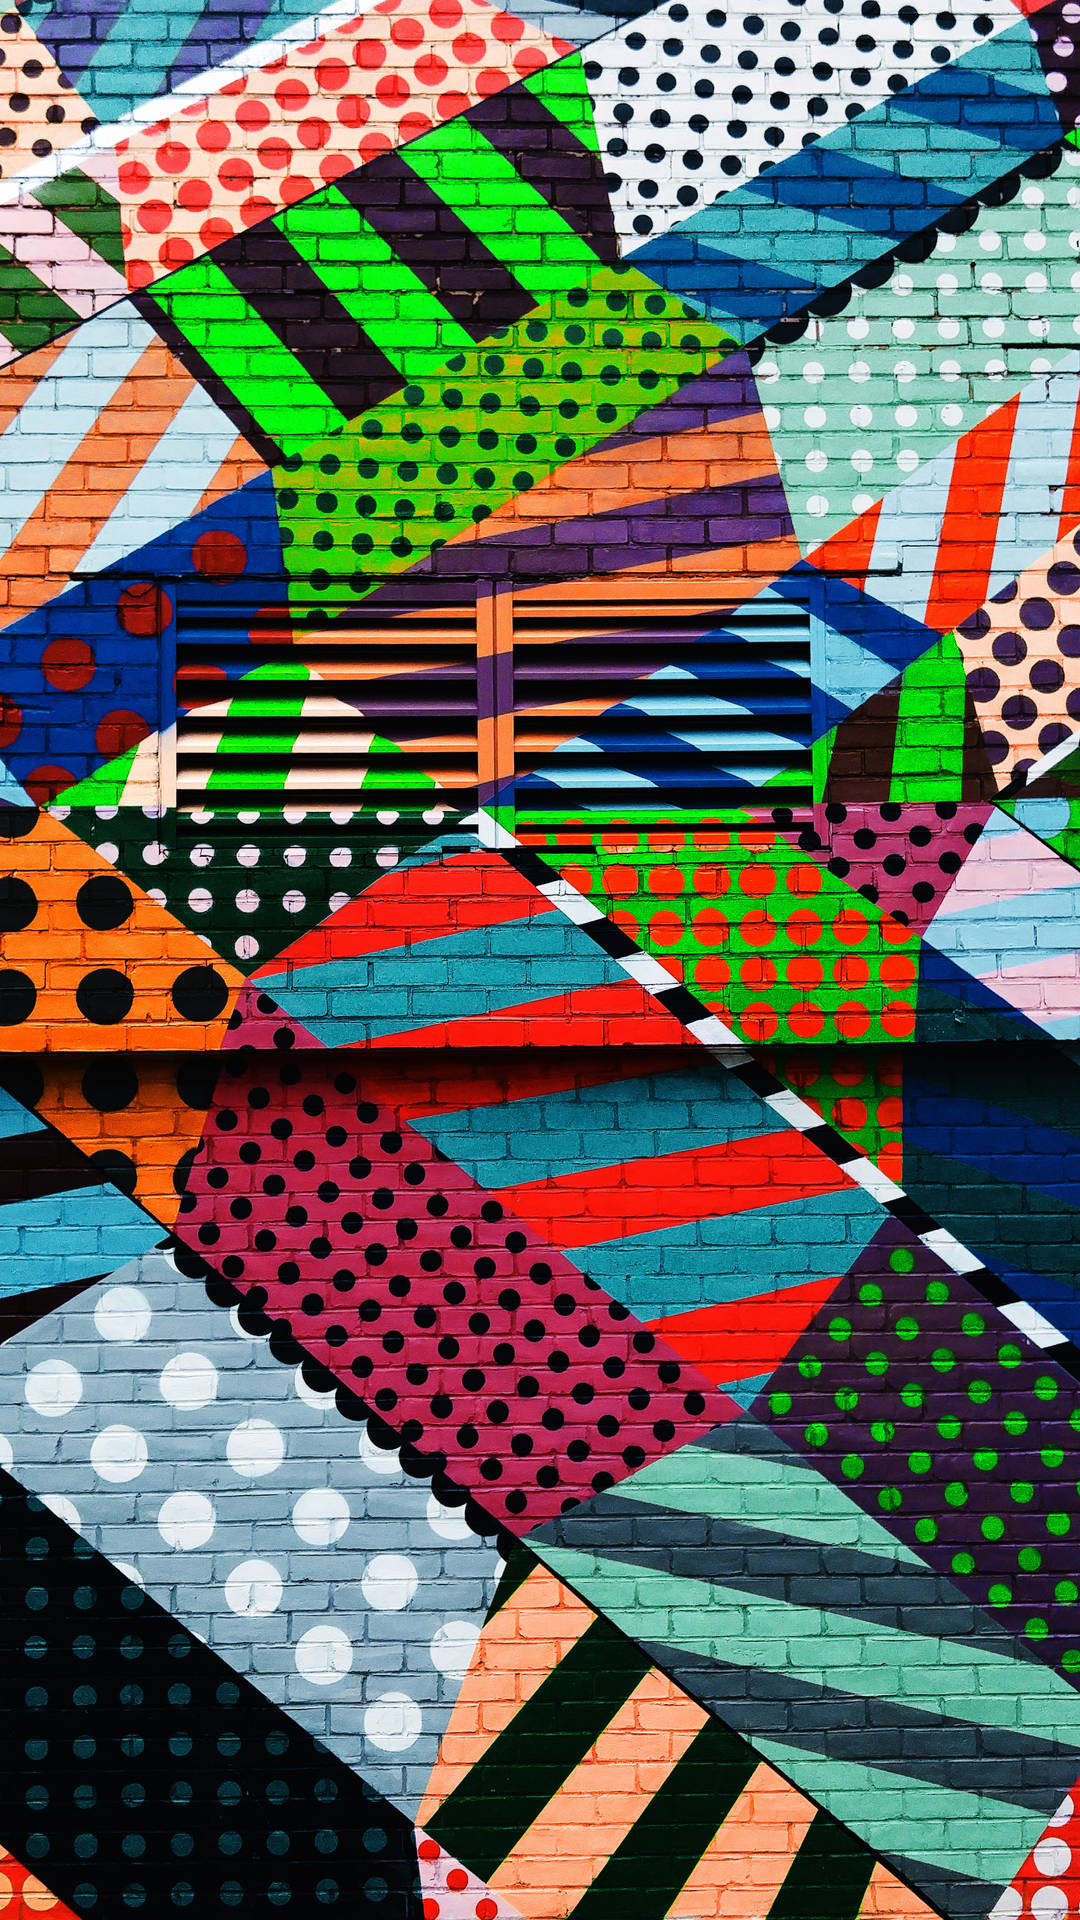 Abstract graffiti wallpaper of multi-colored lines and polka dots.